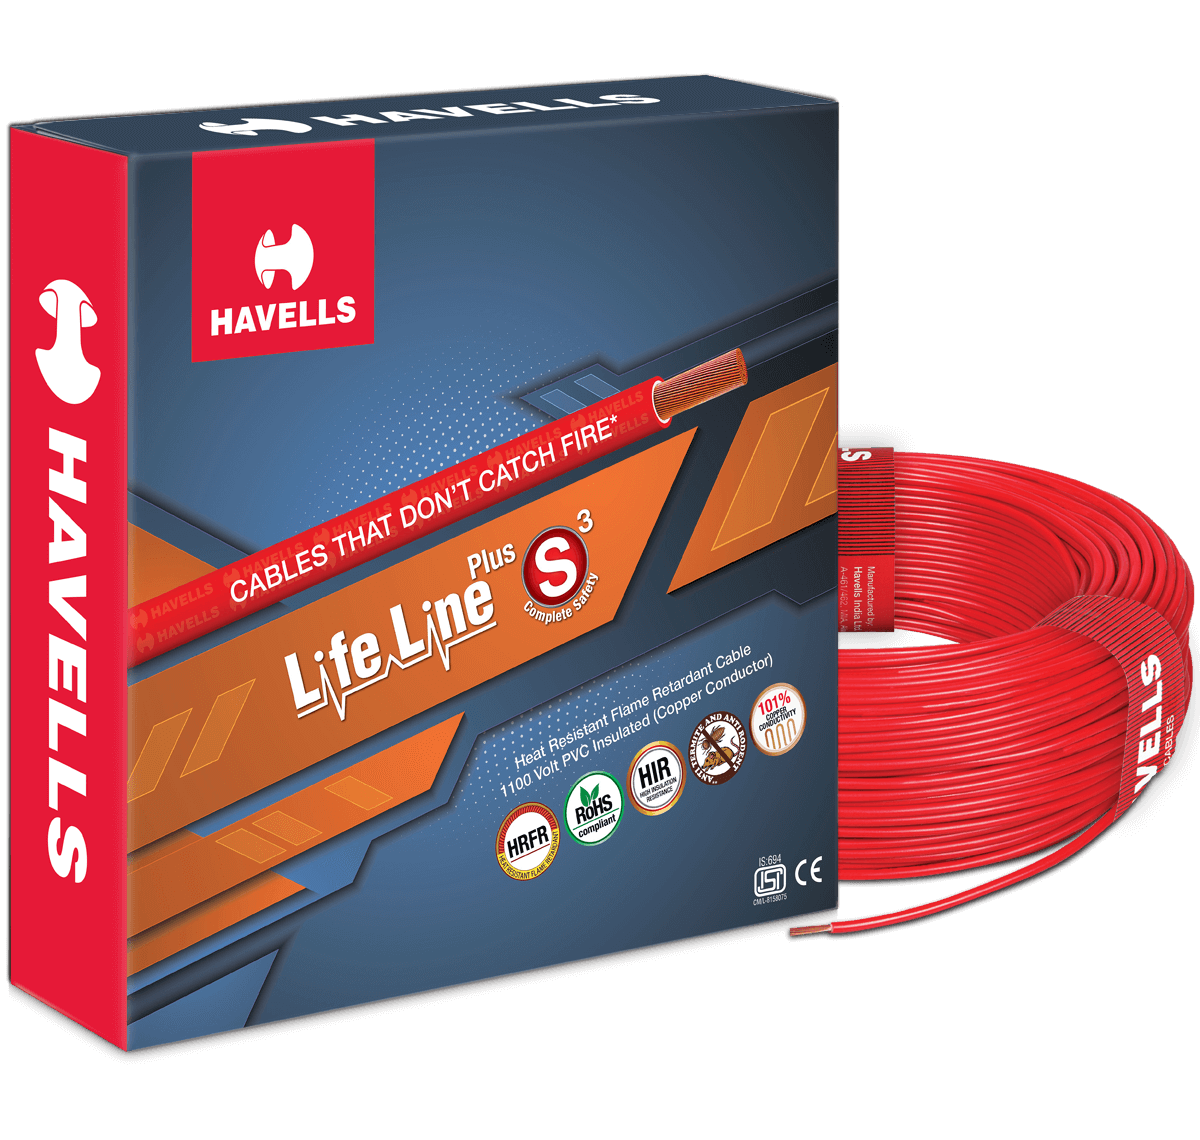 HAVELLS LIFE LINE PLUS S3 HRFR CABLES 4.0MM 90MTR LENGTH COPPER WIRE